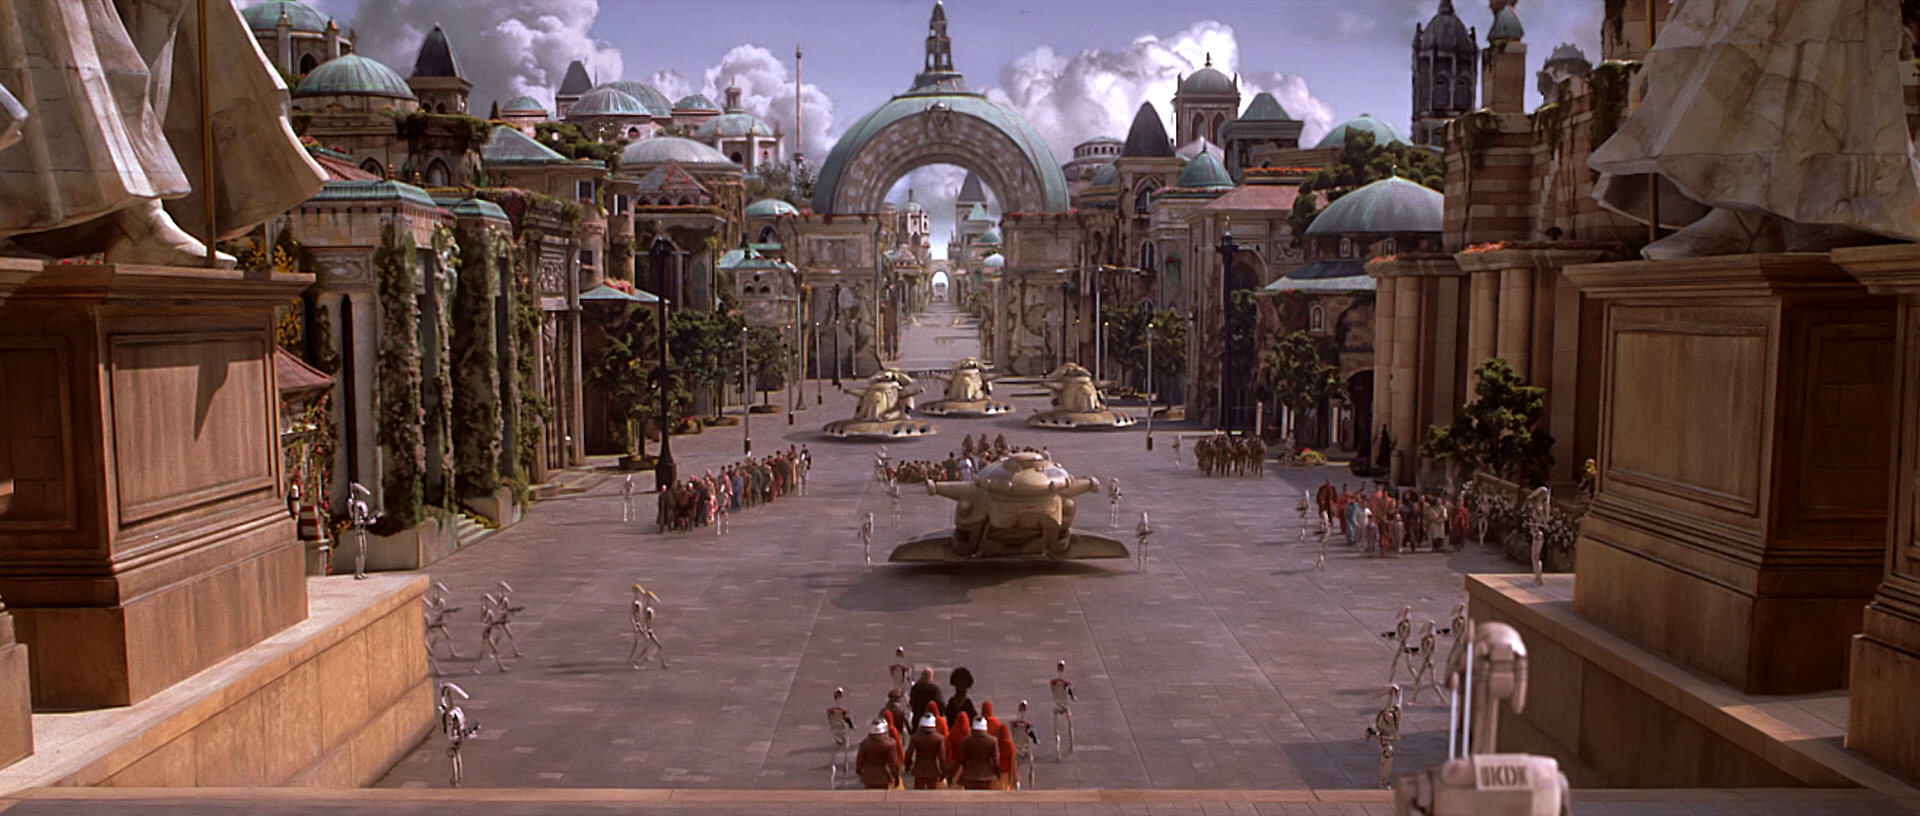 star wars ii attack of the clones castle